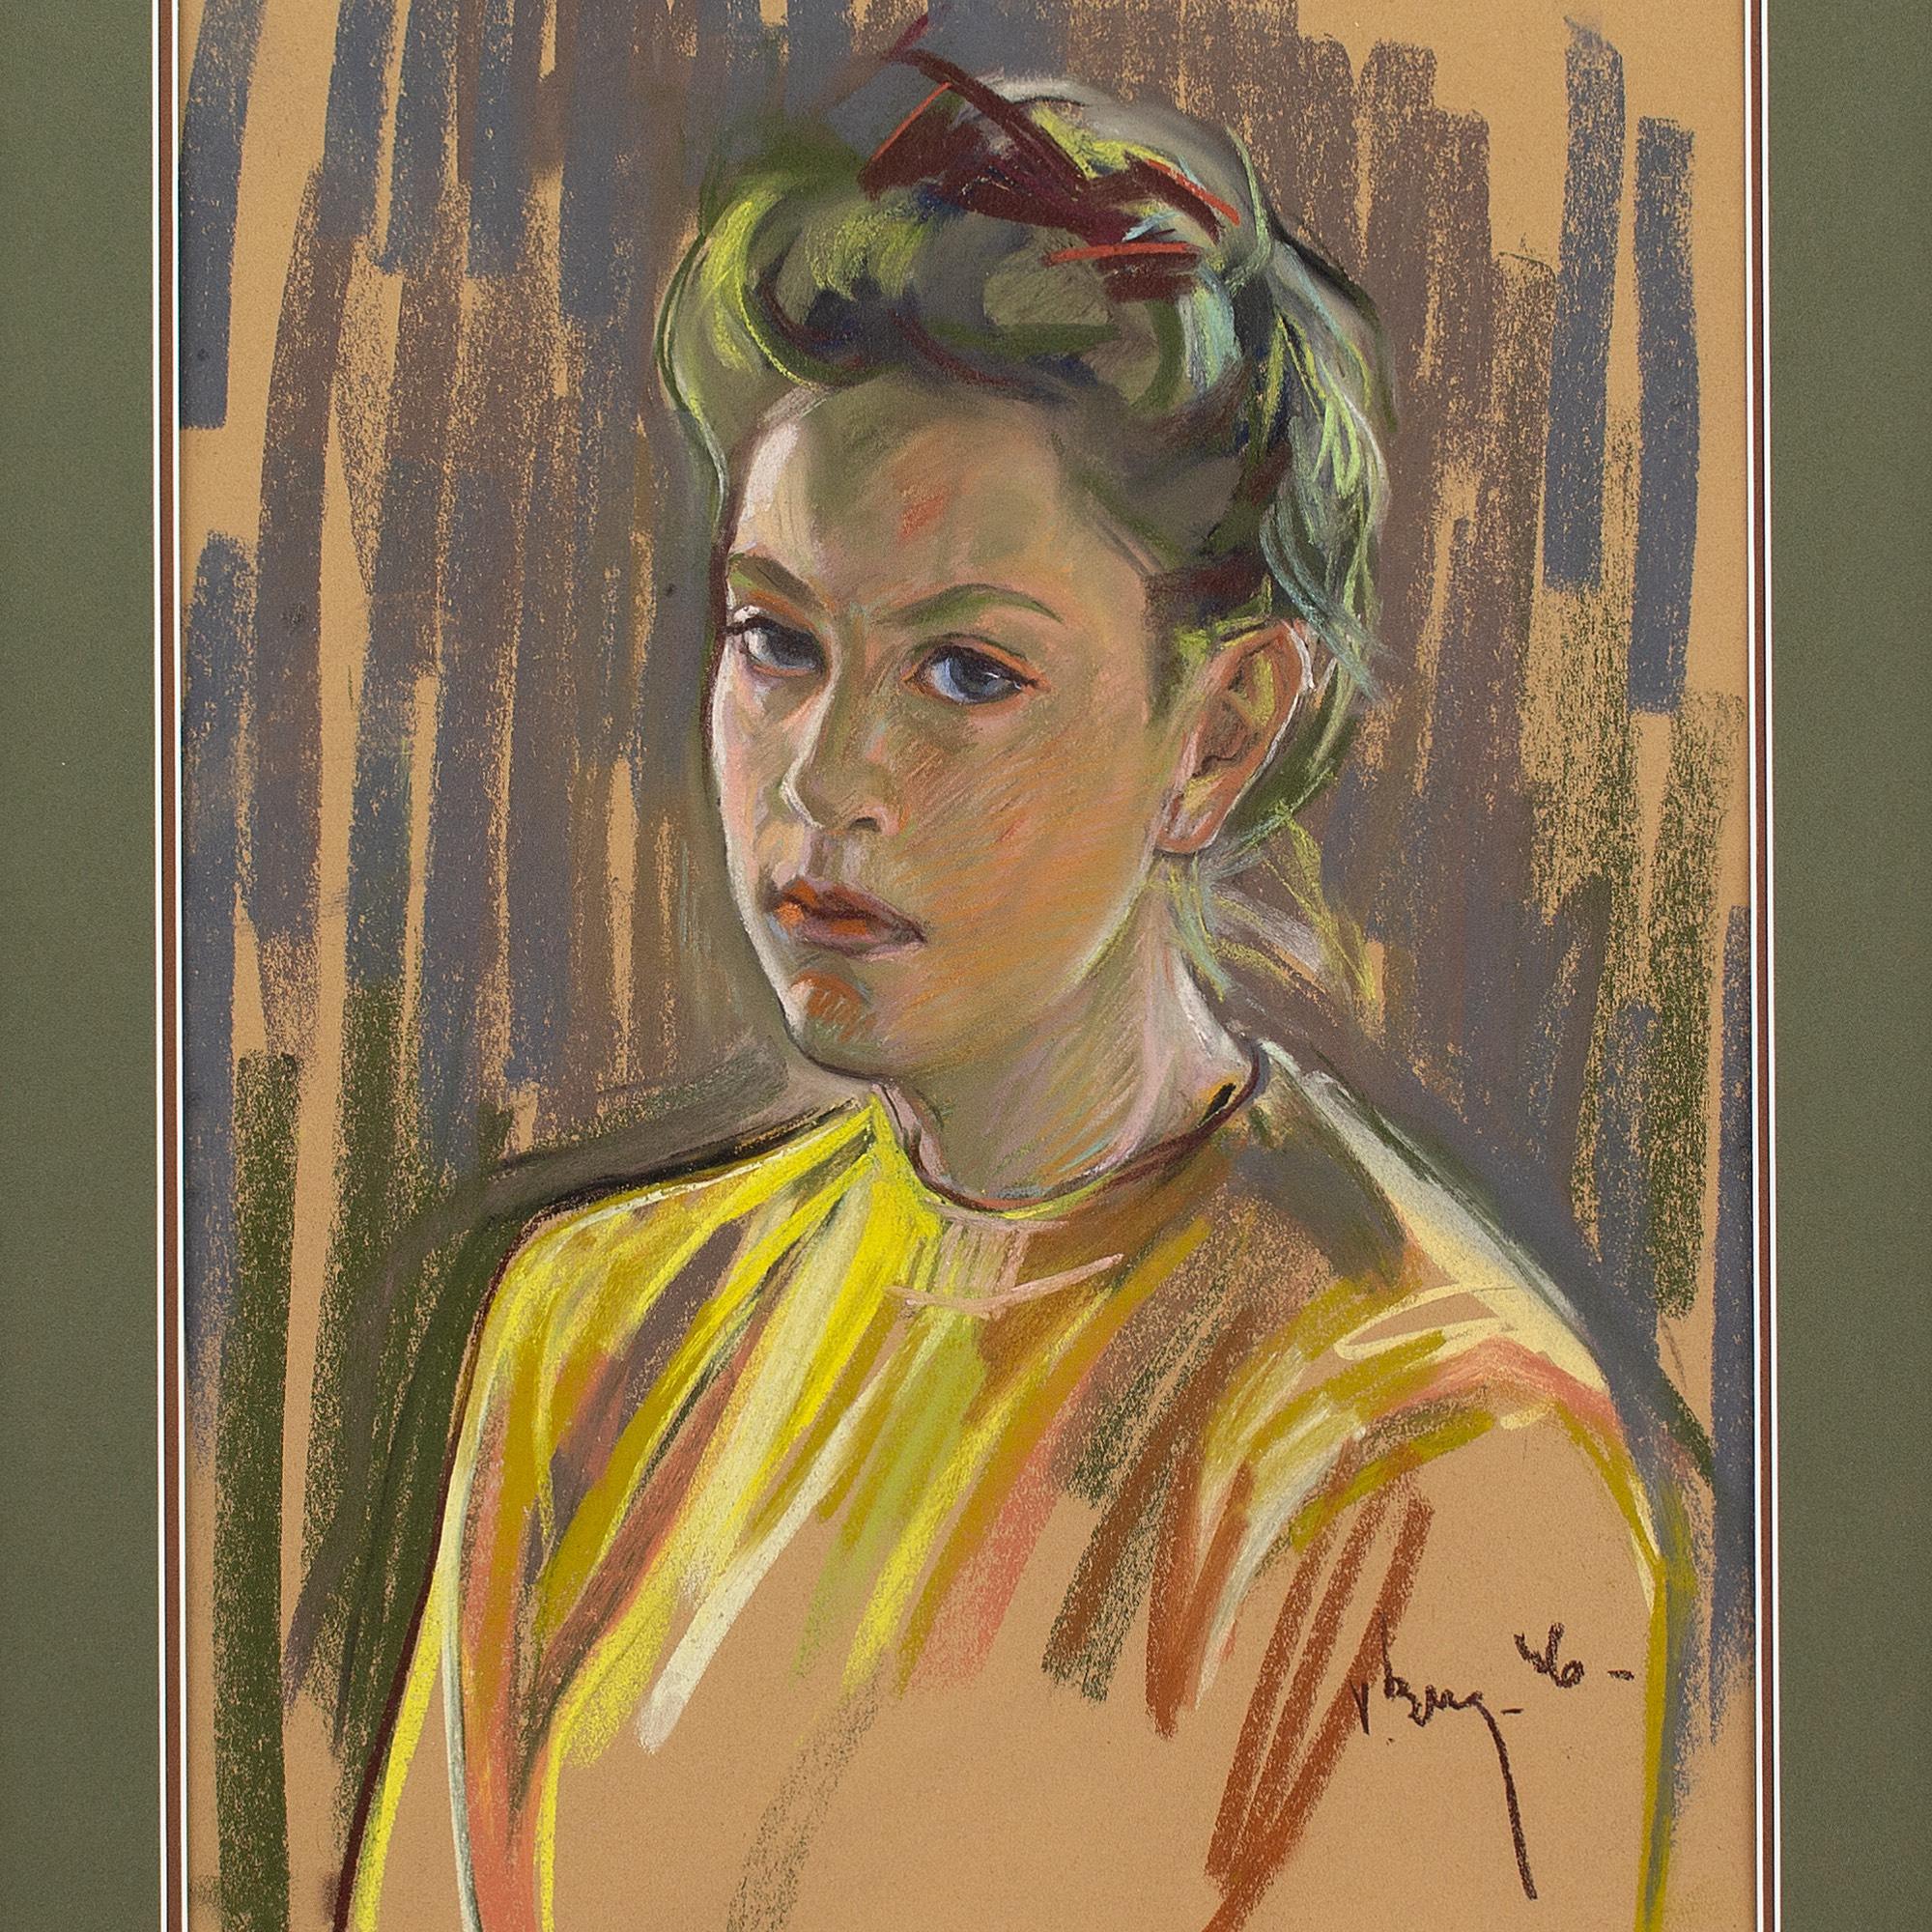 This mid-20th-century portrait depicts a young woman with an orange top. She sits, partially turned, her image captured with strong lines and confidence marks.

The work is signed, maybe V Berg, in the lower right but we’ve been unable to track down